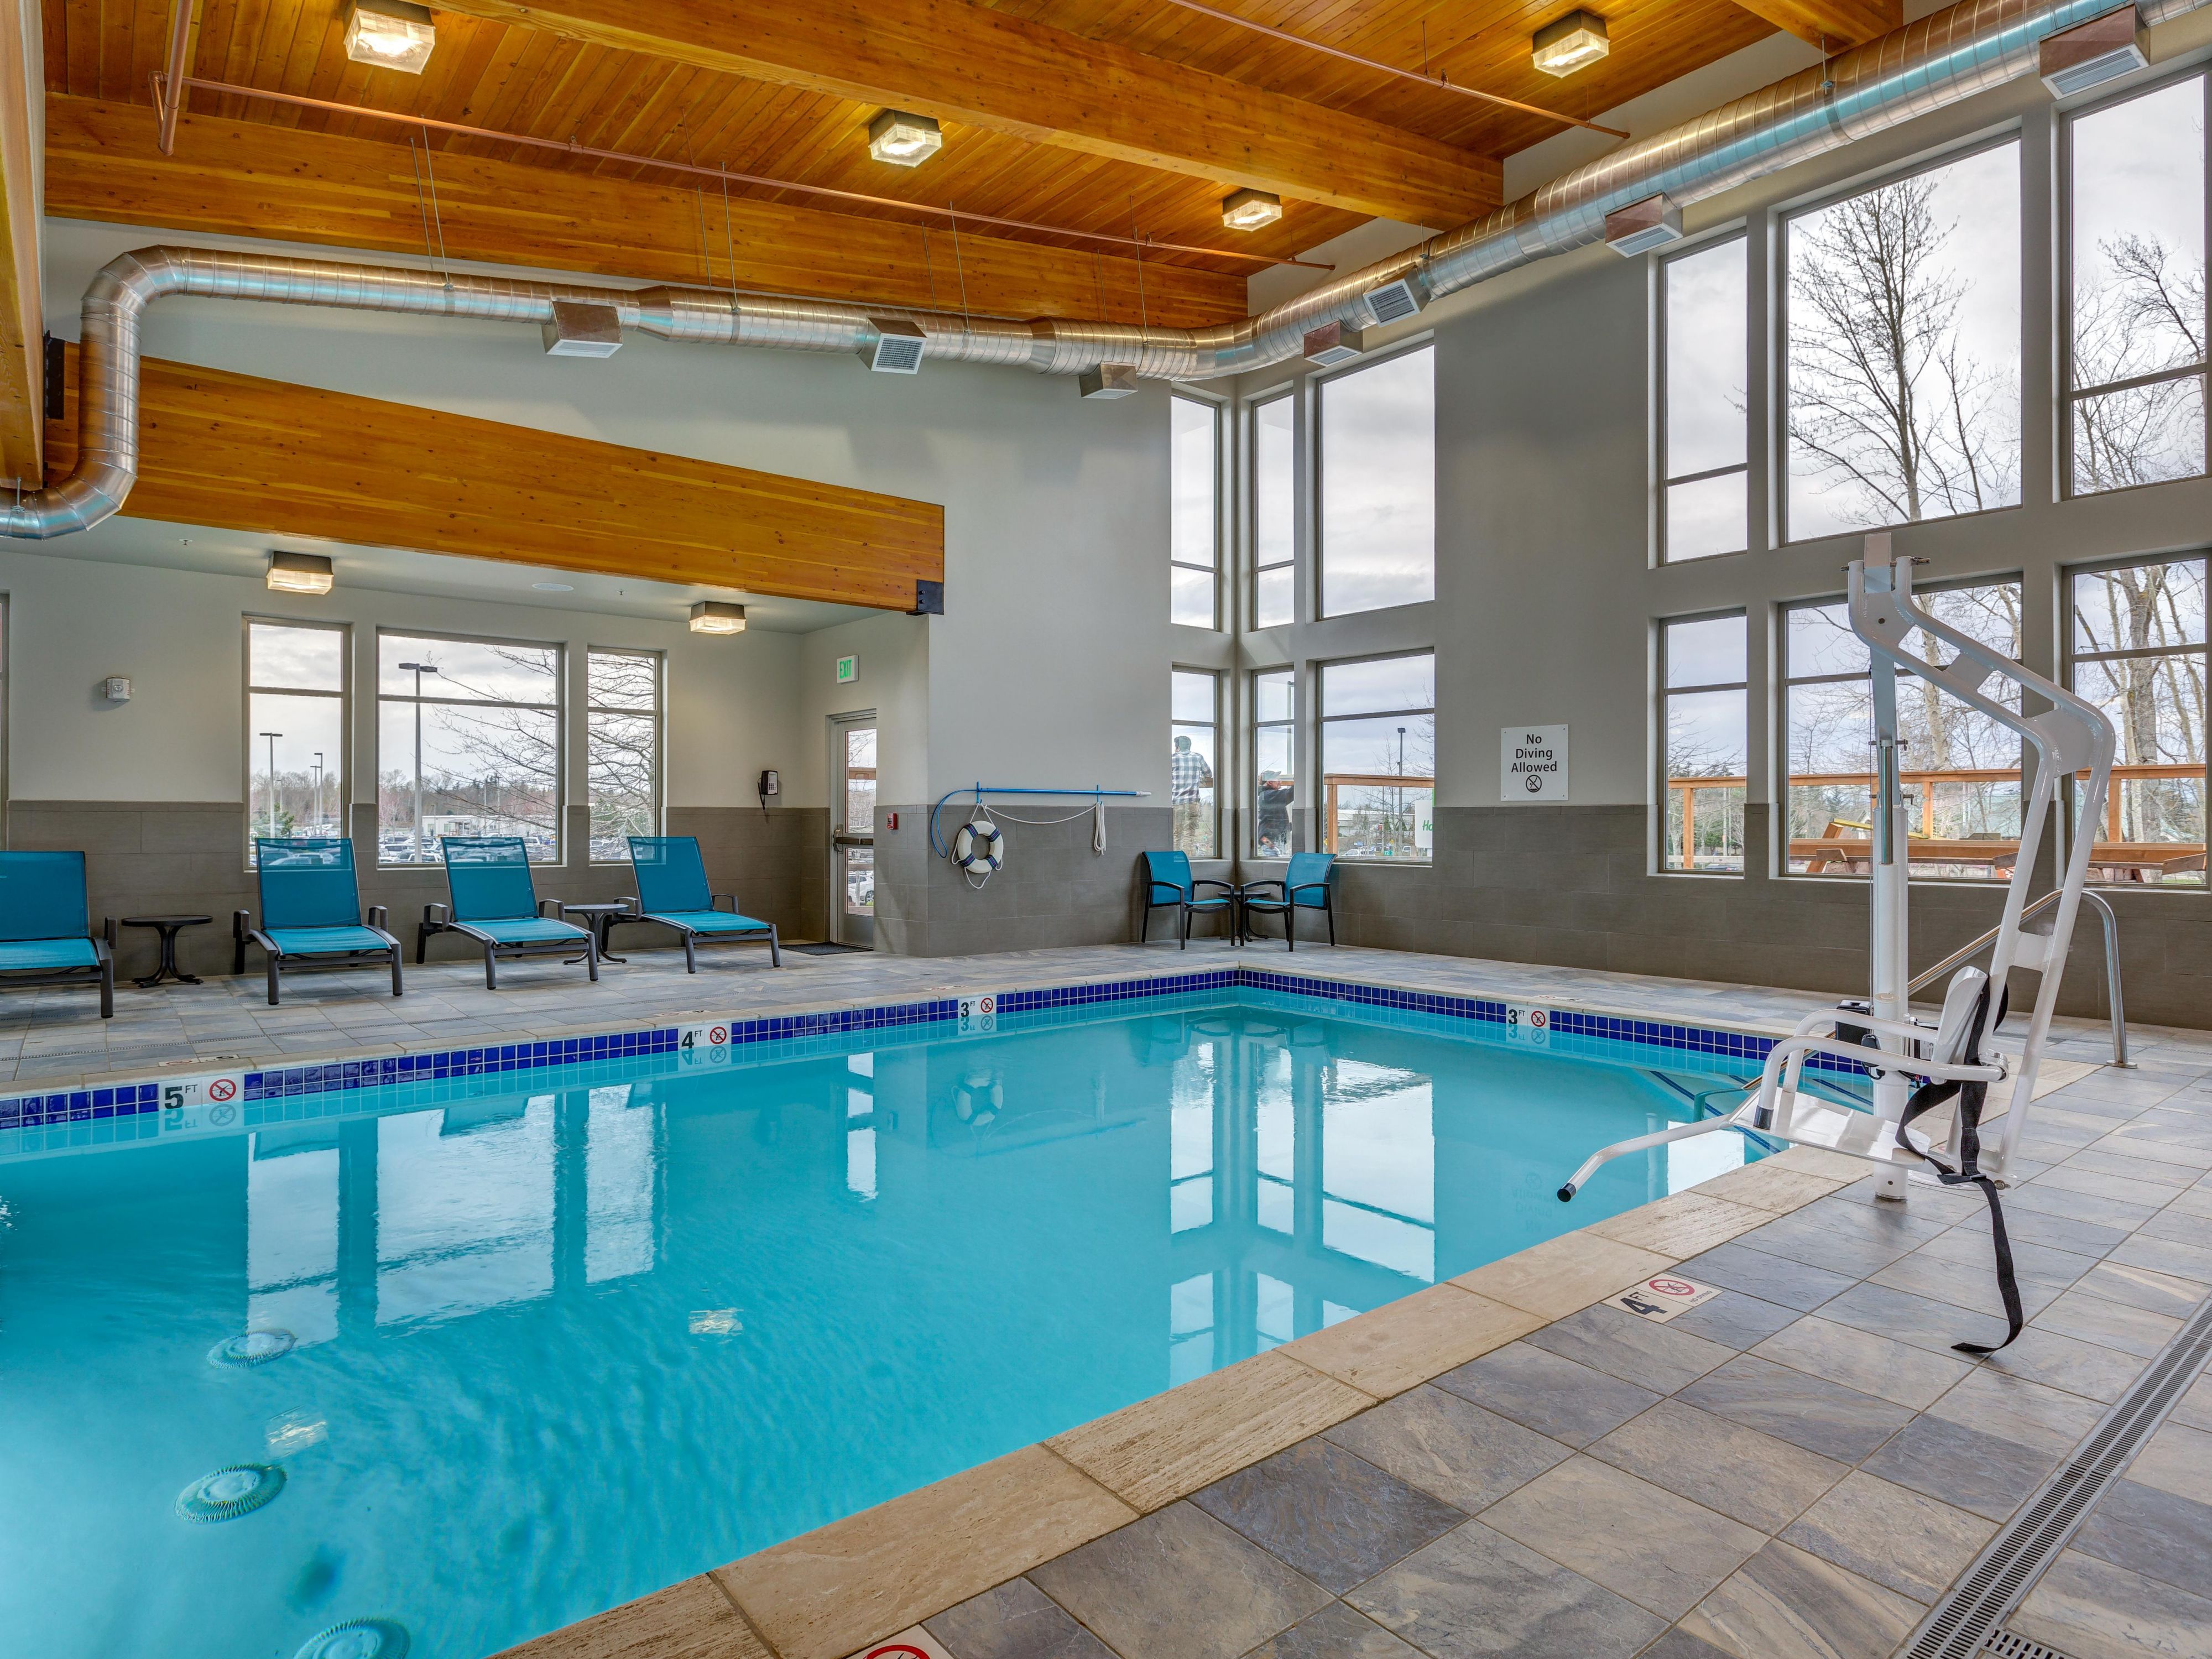 After you work out in our fully equipped fitness center, relax in our indoor pool and spa. The relaxation time in our pool area will mean extra energy for your business presentation or family vacation! 